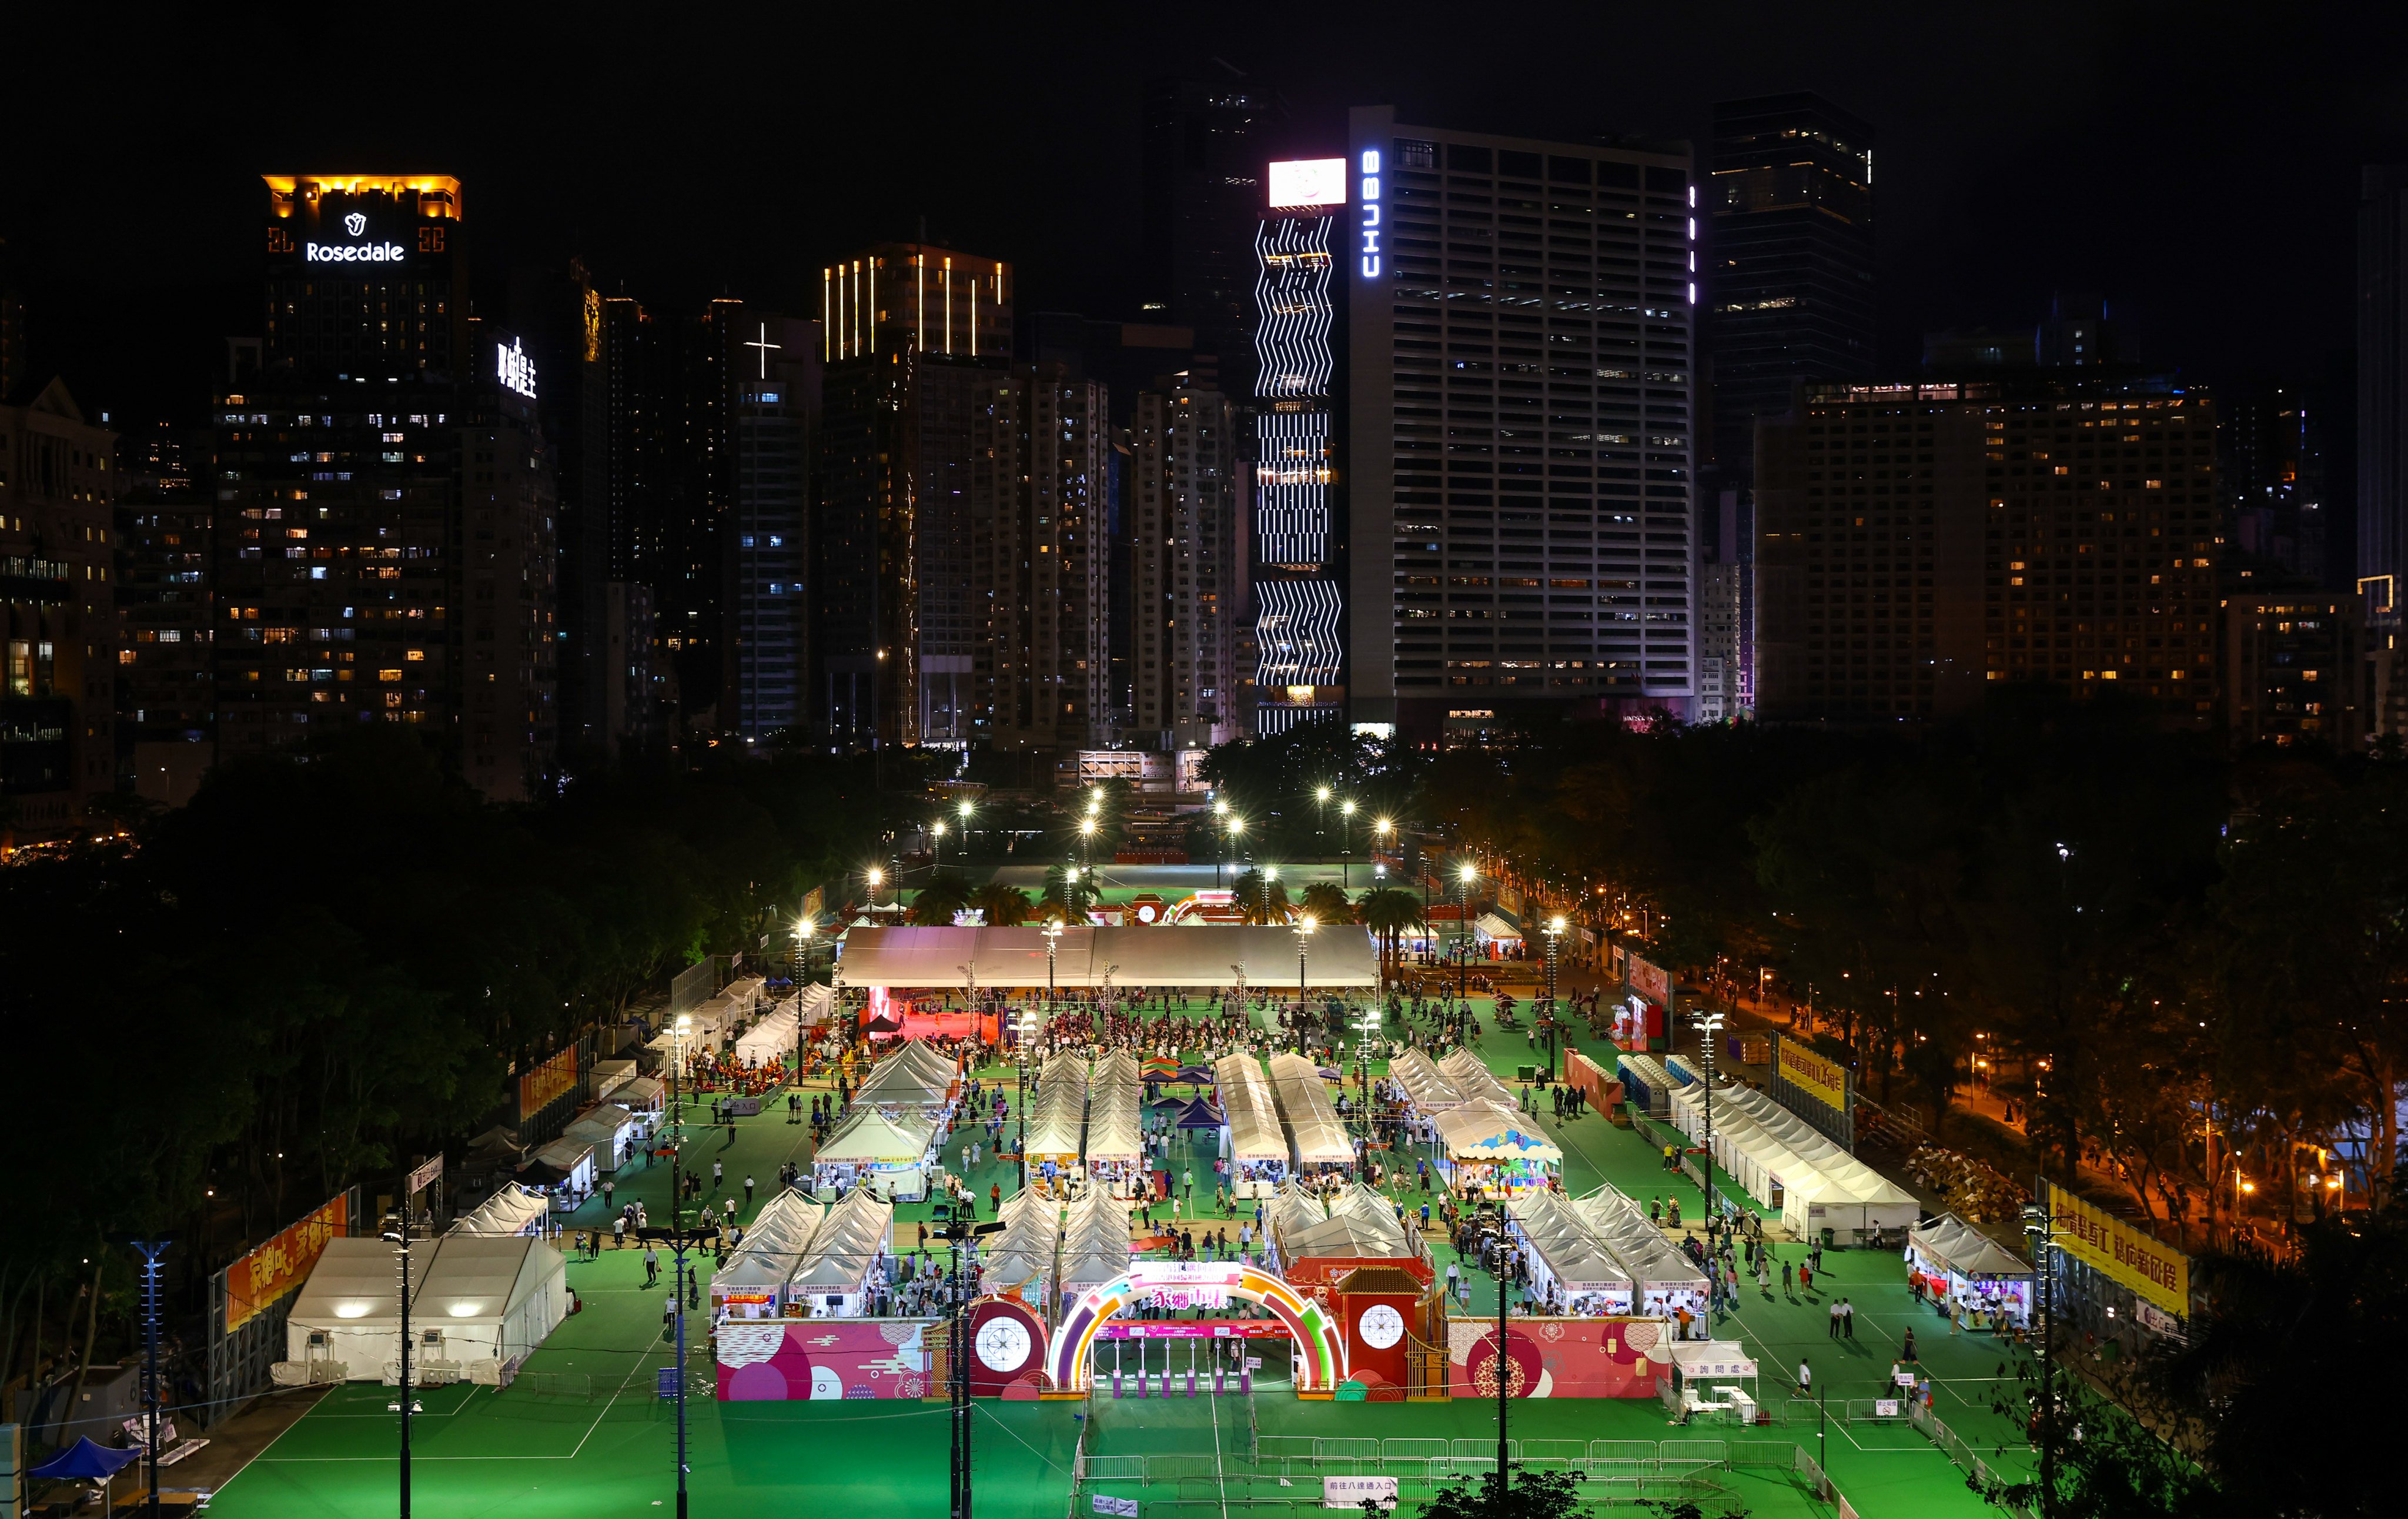 Victoria Park on June 4  in 2022. Every year on June 4, the park hosted a gathering commemorating the victims of the Tiananmen Square crackdown, but the event has been banned in recent years. Photo: Dickson Lee